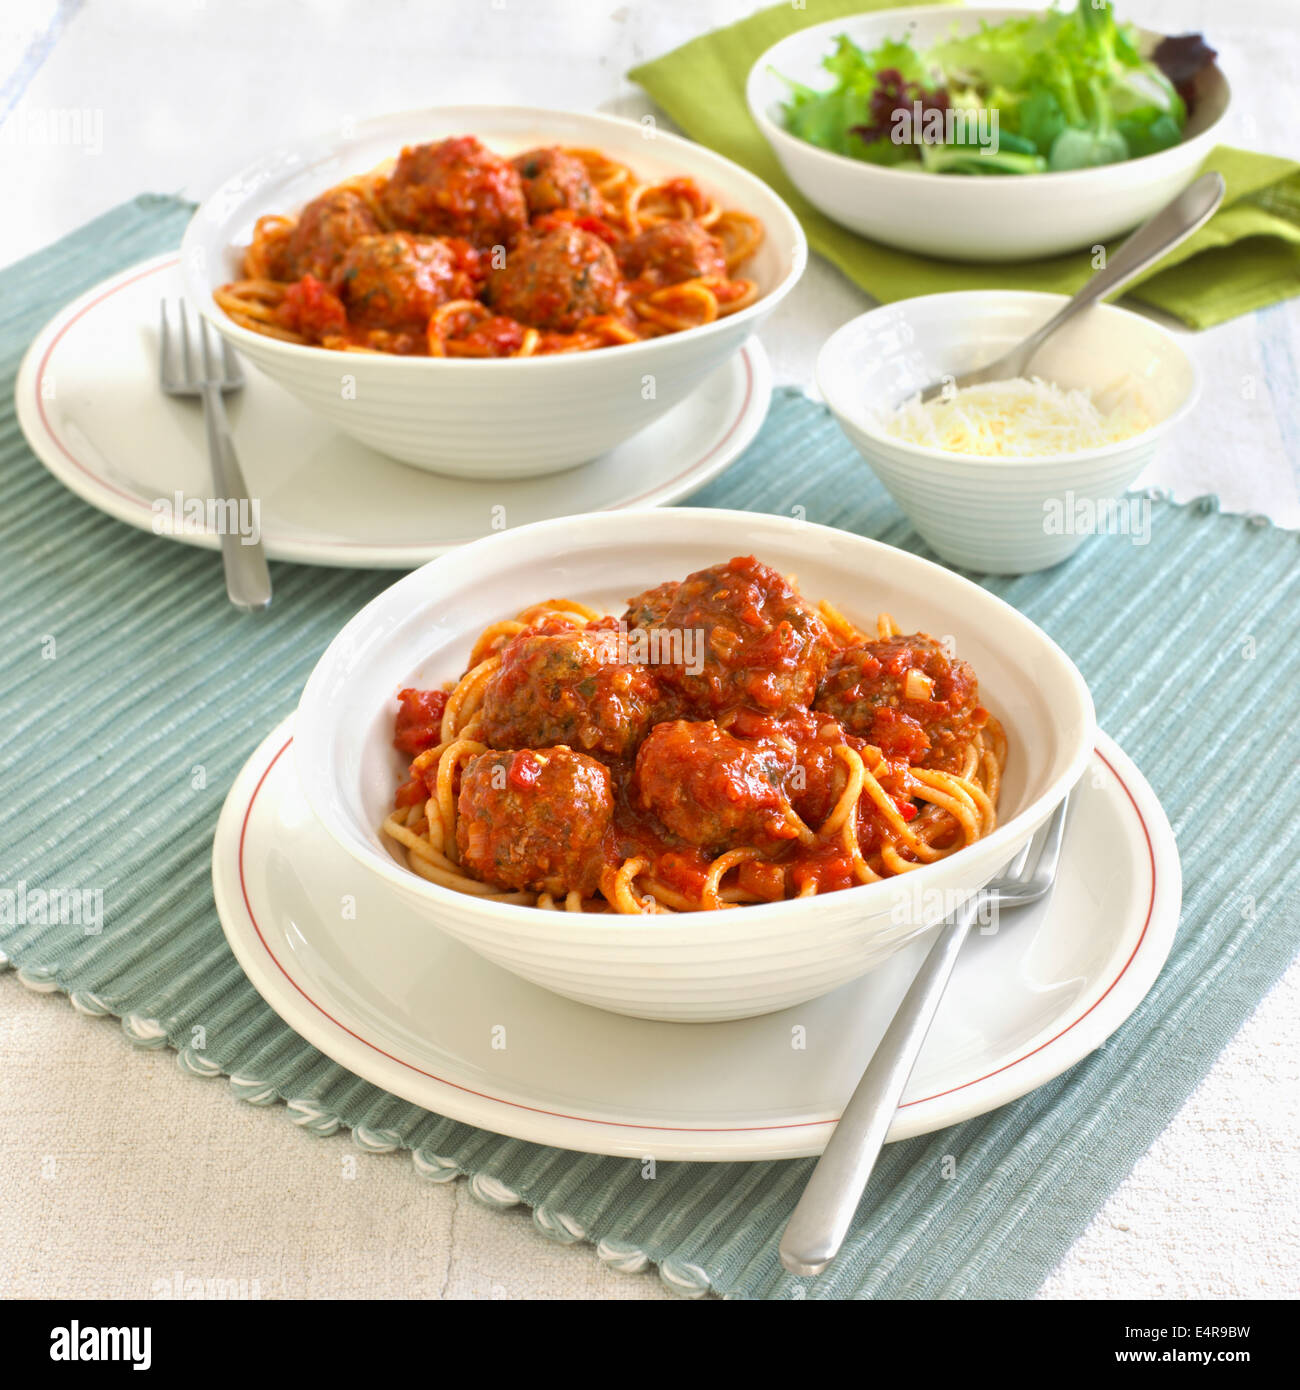 Spaghetti and meatballs, two portions Stock Photo